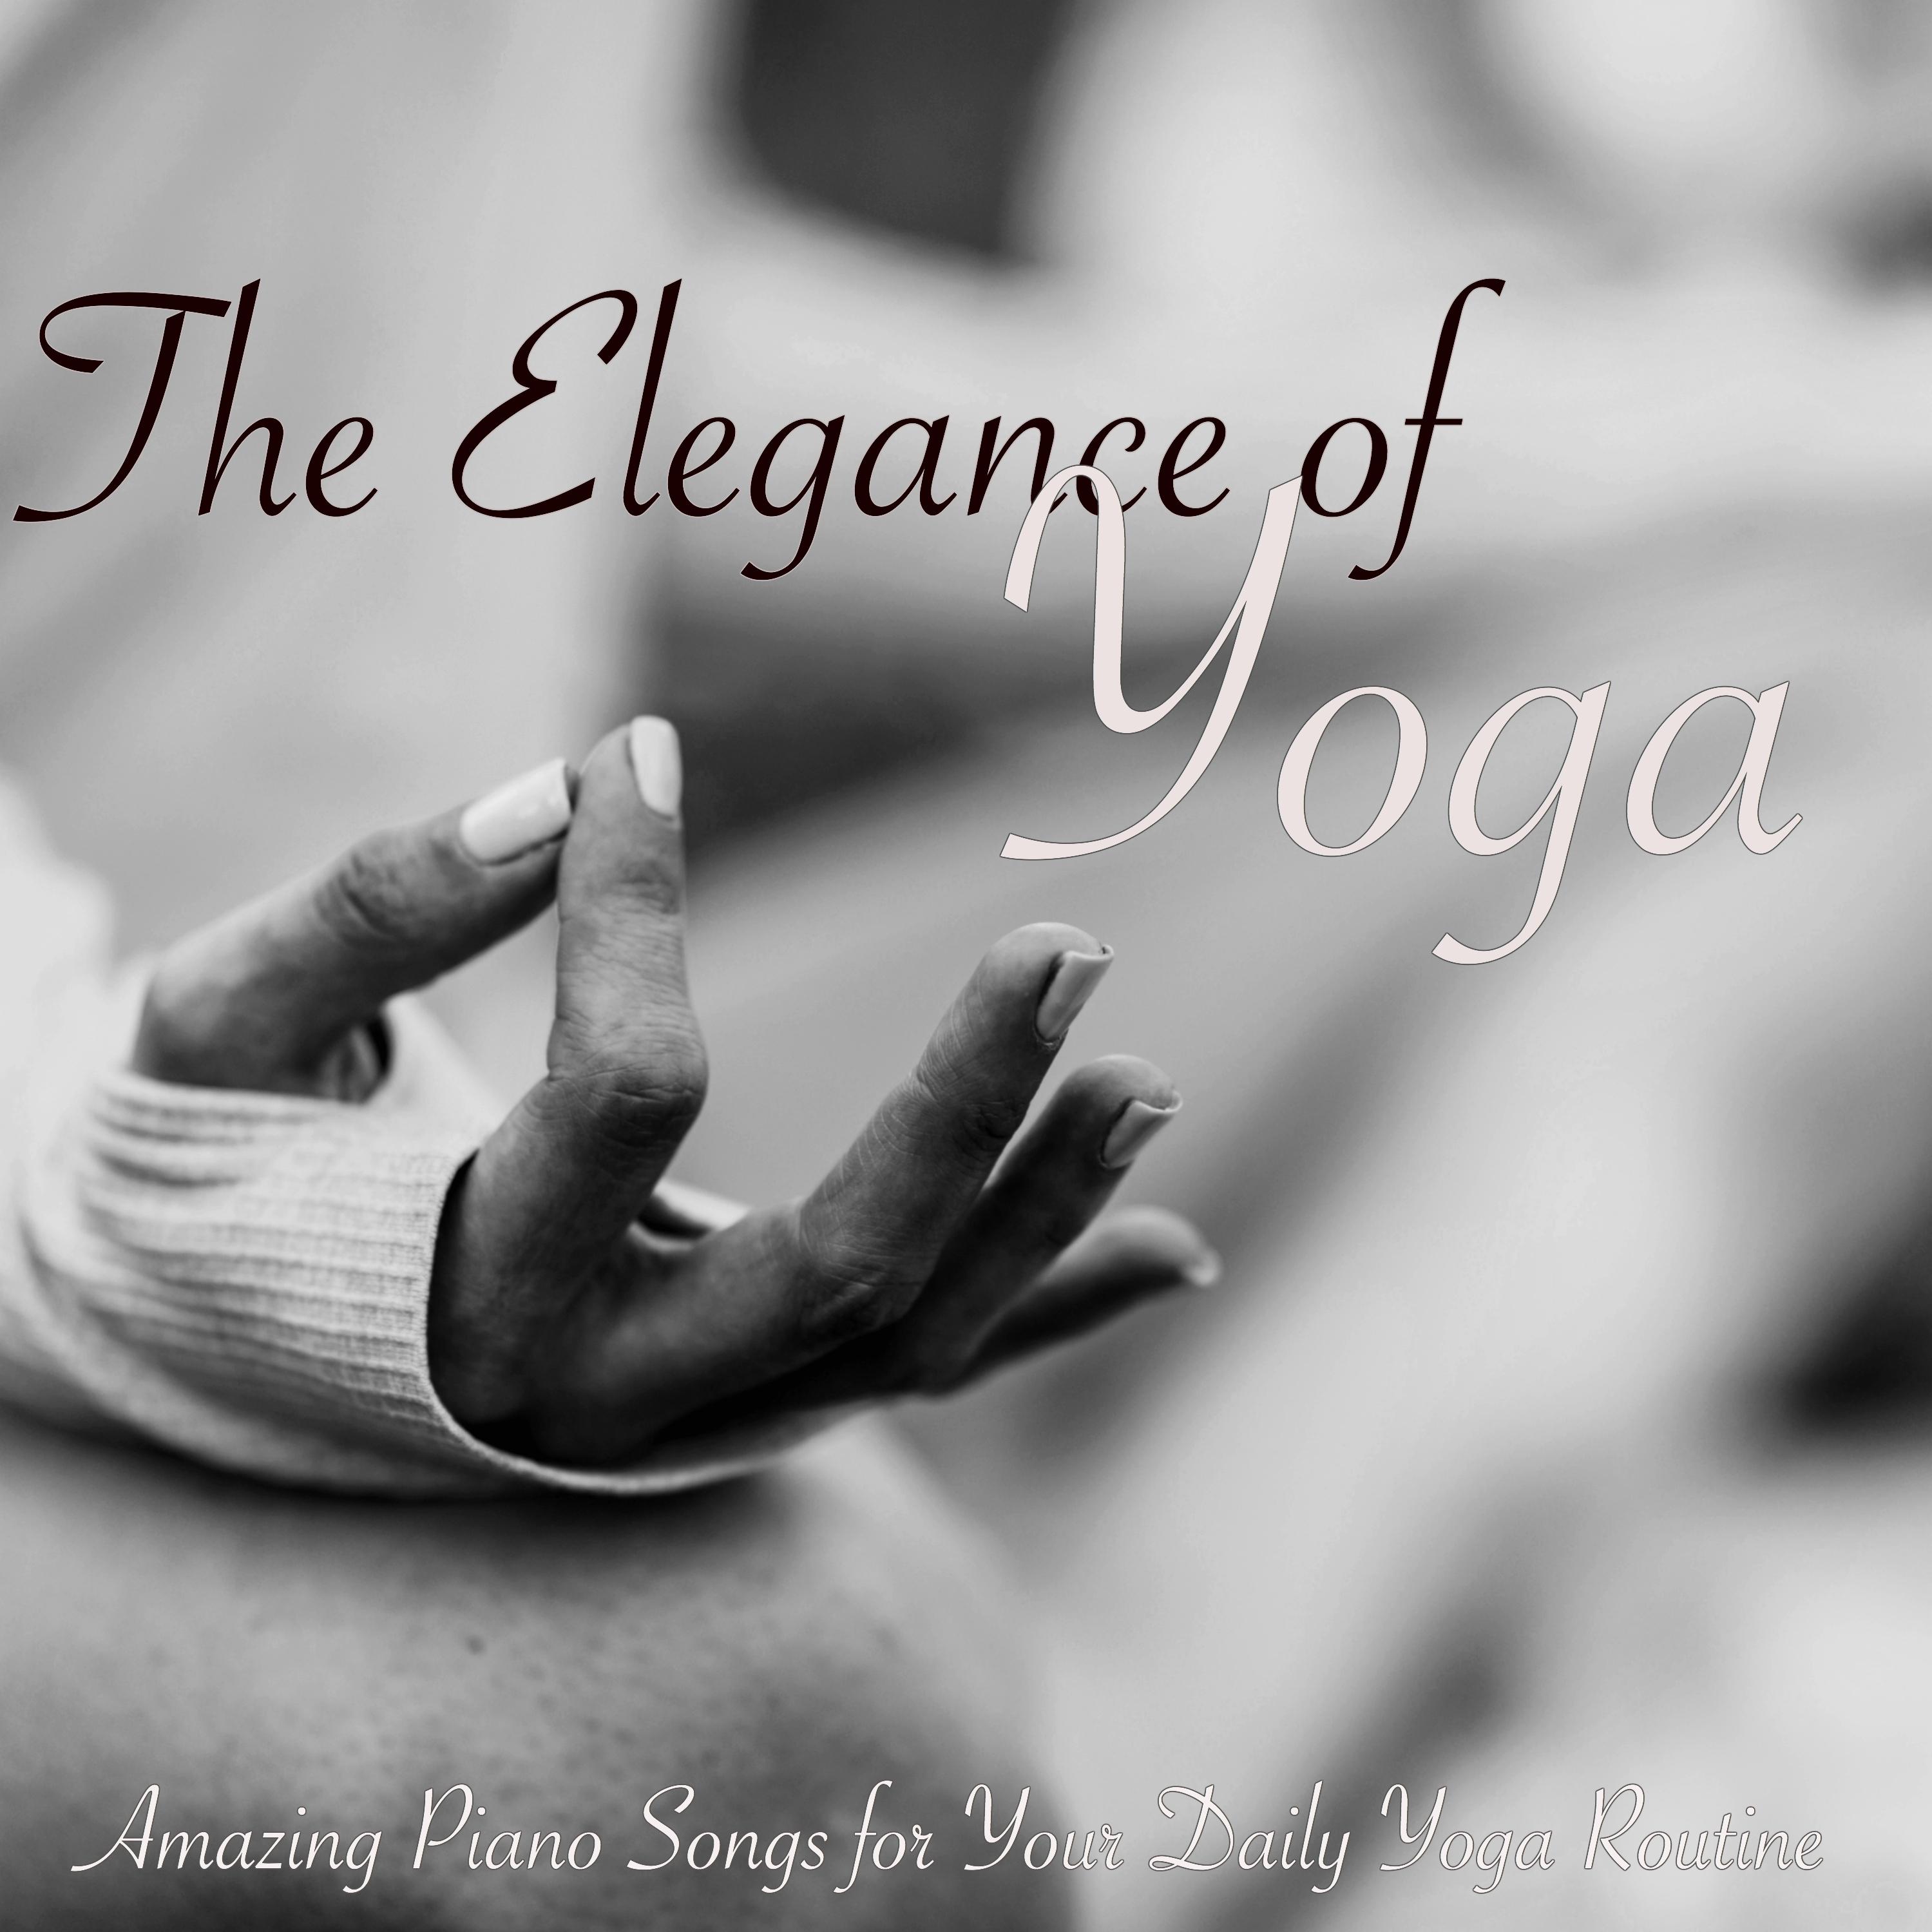 The Elegance of Yoga – Amazing Piano Songs for Your Daily Yoga Routine